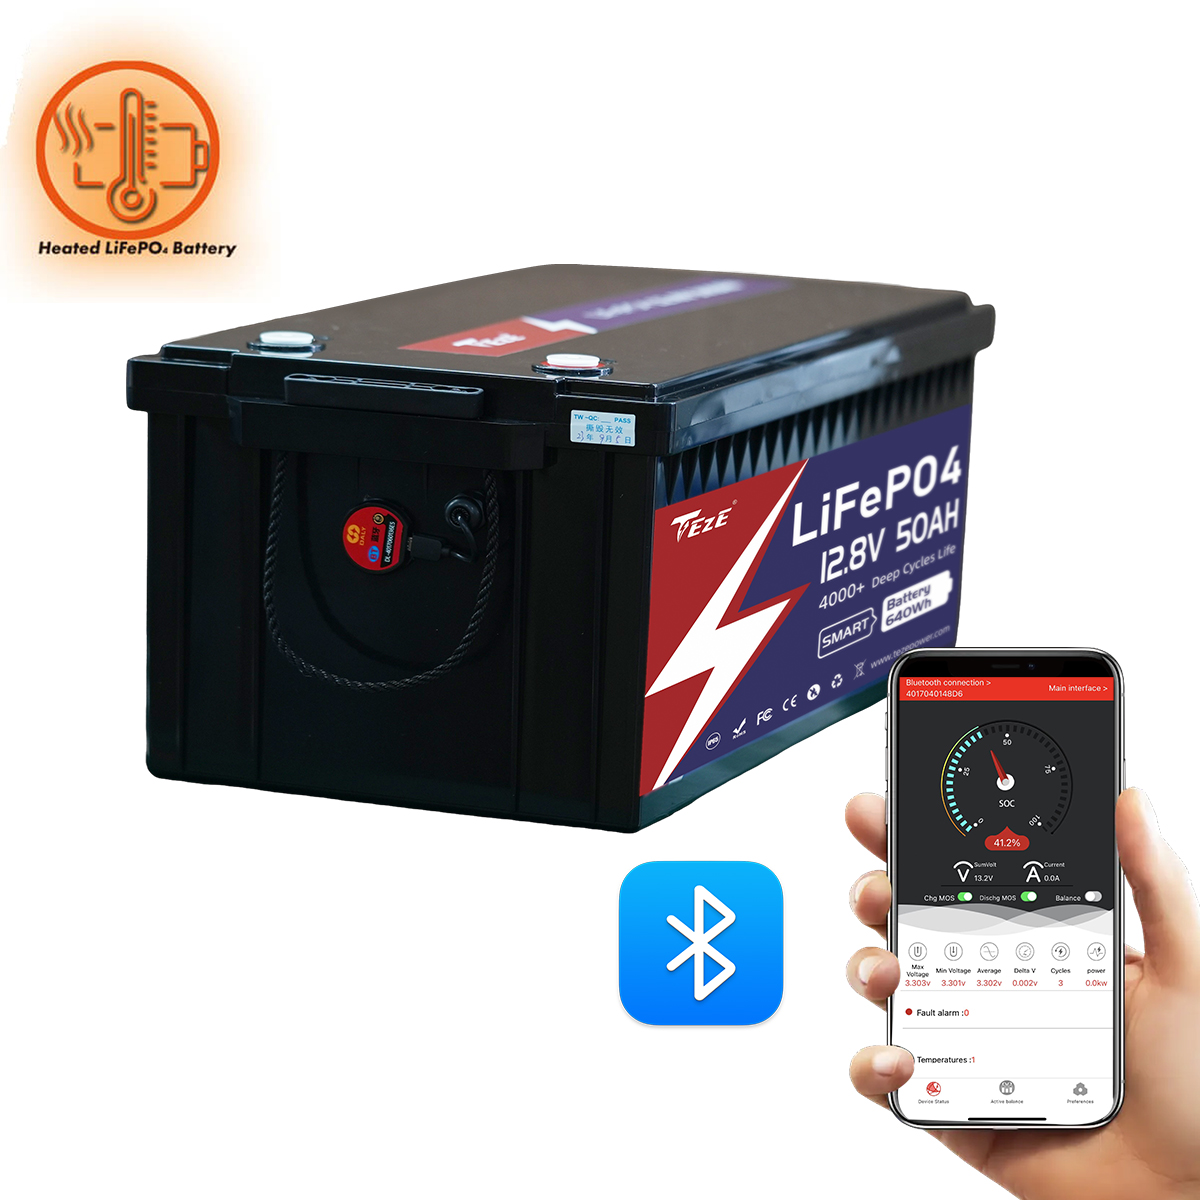 NEW-TezePower 12V50Ah LiFePO4 Battery with Bluetooth, Self-heating and Active Balancer, Built-in 50A Daly BMS (Bluetooth External Version)-TezePower